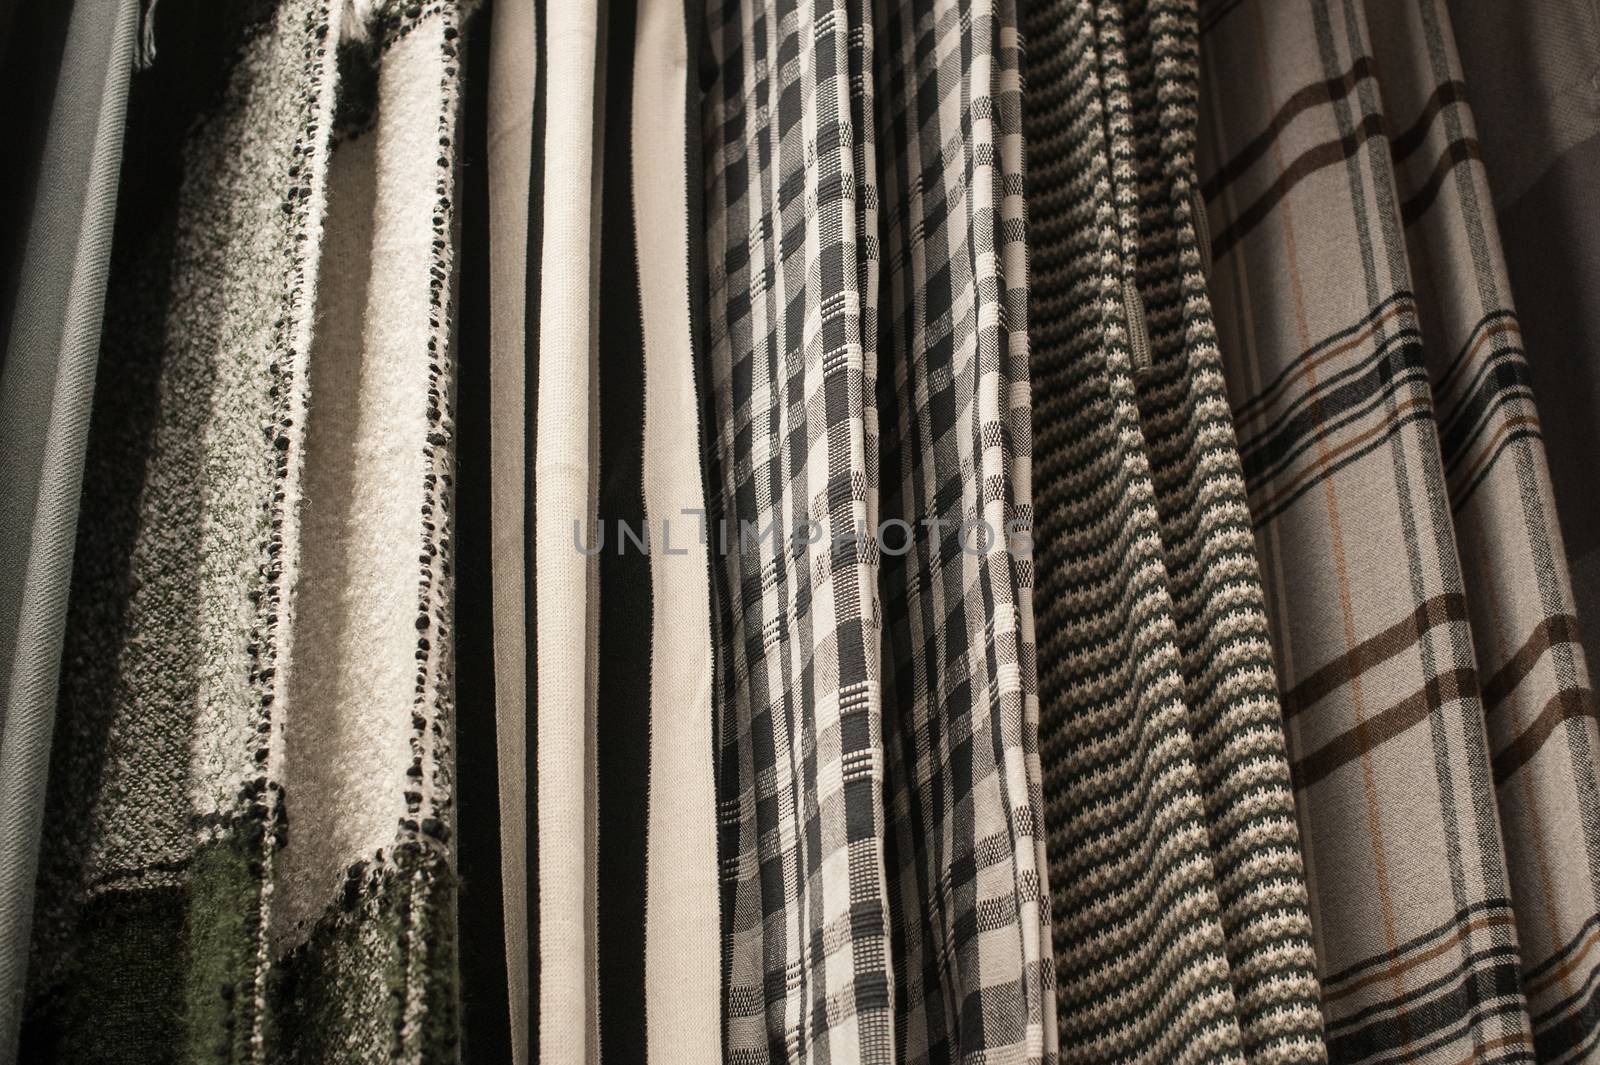 Texture sets of fabrics hang on the trempel in the closet.